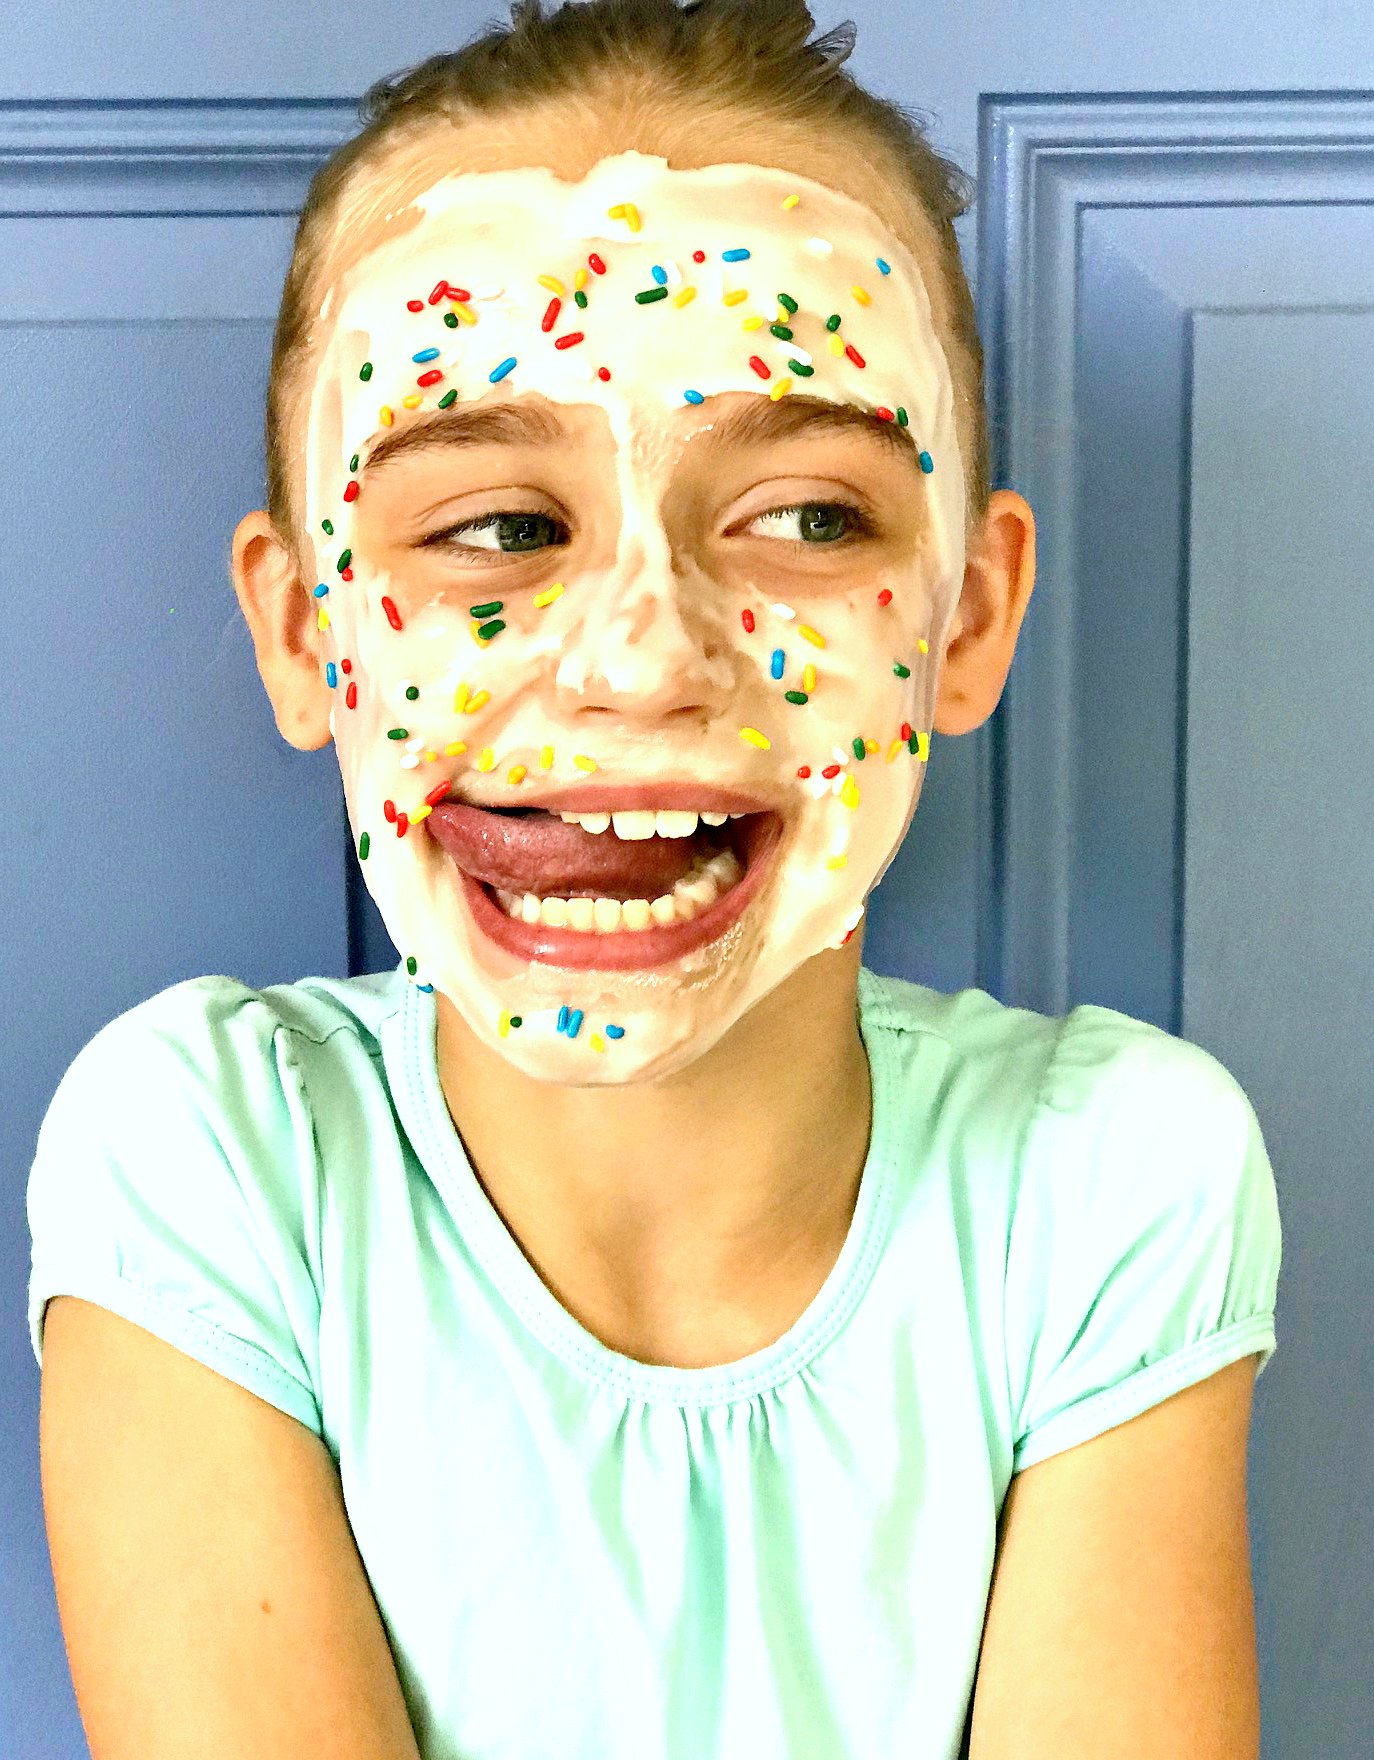 Whether you're throwing a spa birthday party or just want some fun relaxation time with your kids, this DIY edible face mask is sure to make any little girl (or little boy, if we're being honest) super excited for some pampering. Inspired by the Sunny Day preschool series on Nickelodeon, you can follow the simple and easy recipe to make it yourself, or you can just grab a jar next time you're at the grocery store. And it tastes good too! #spaday #kids #parenting #facemask #recipe #edible #diyfacemask #sunnyday